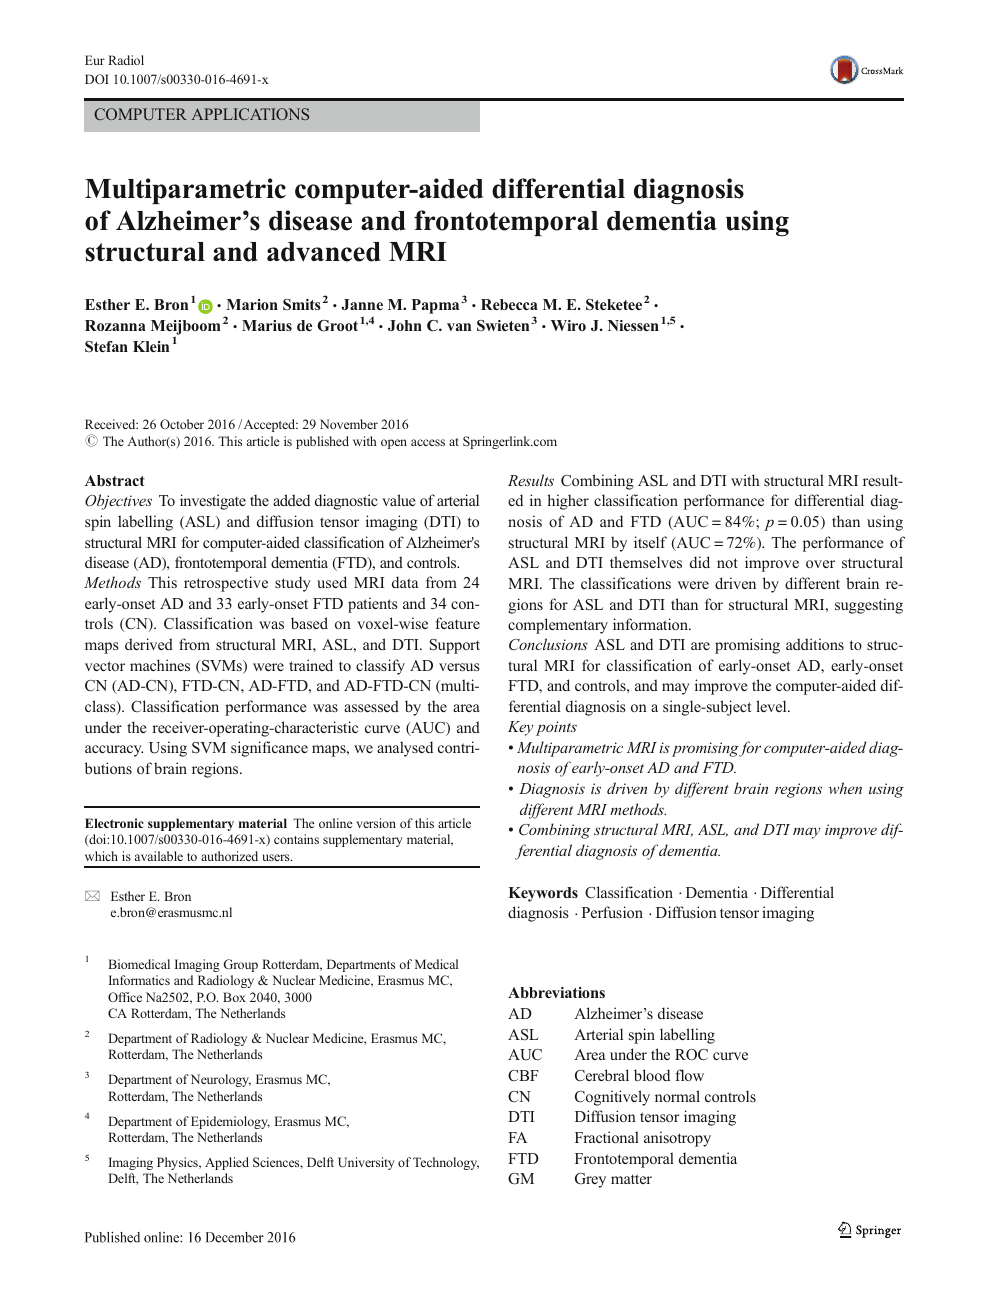 Multiparametric Computer Aided Differential Diagnosis Of Alzheimer S Disease And Frontotemporal Dementia Using Structural And Advanced Mri Topic Of Research Paper In Clinical Medicine Download Scholarly Article Pdf And Read For Free On